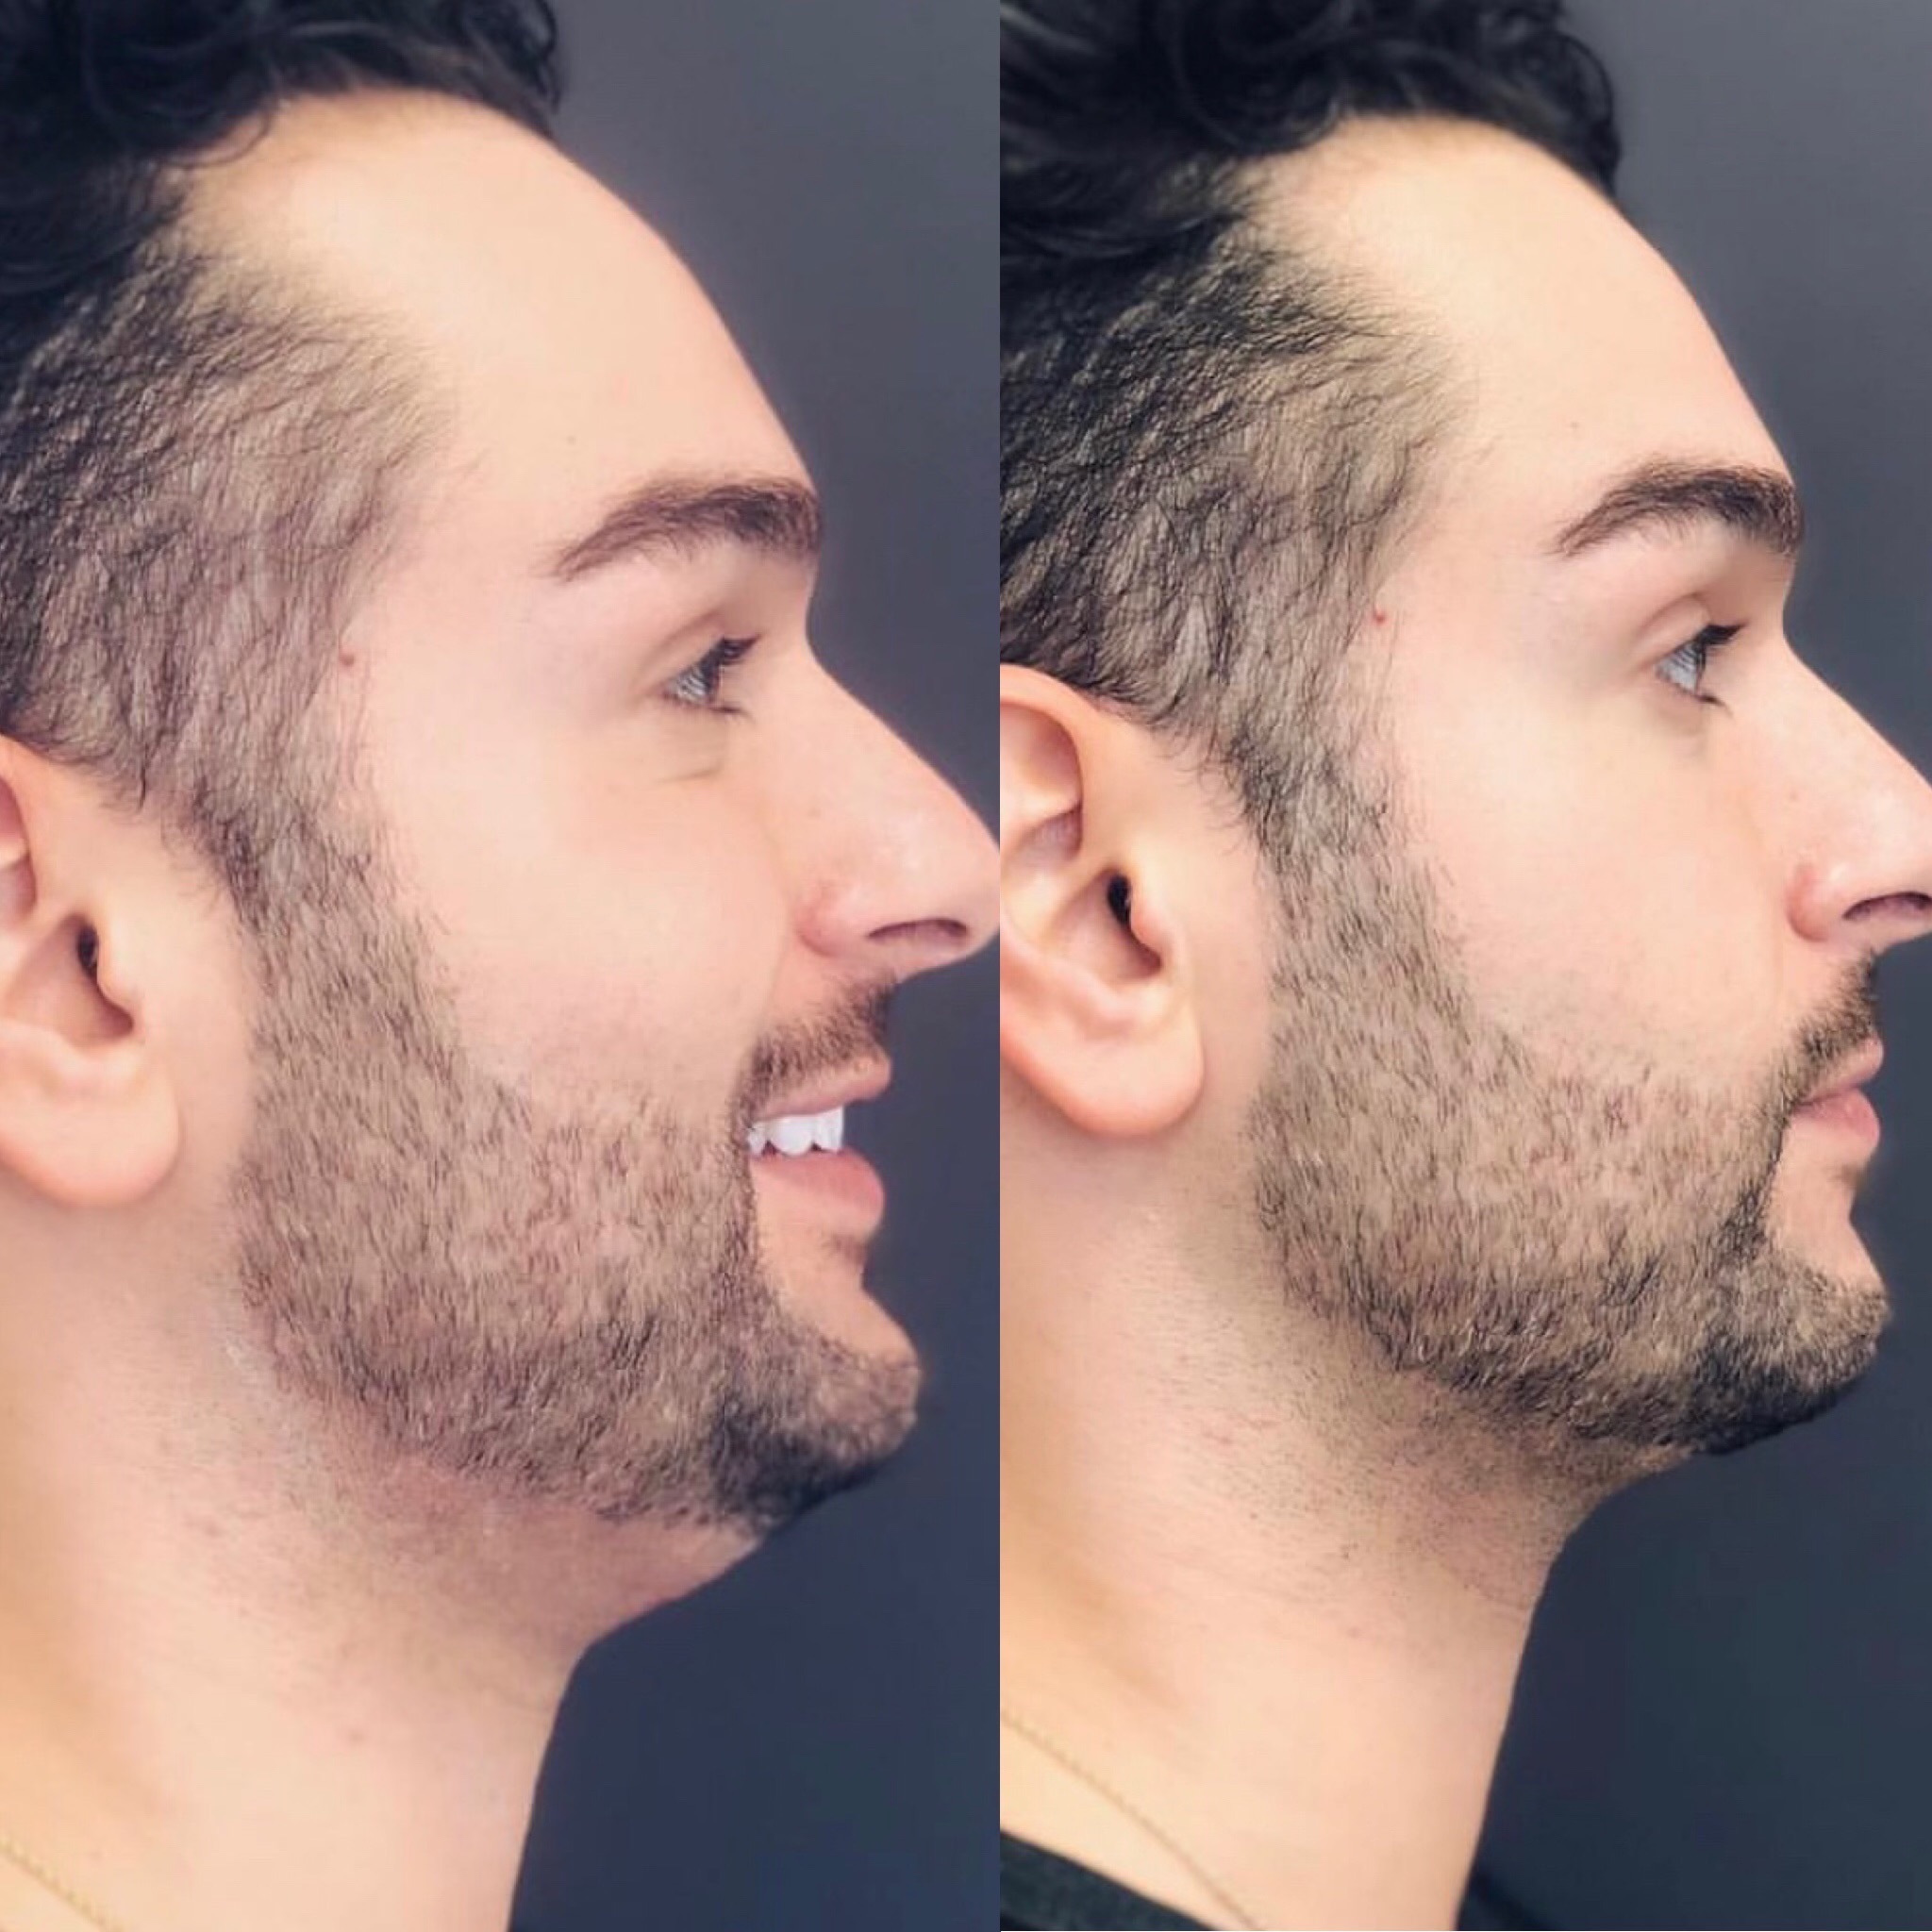 Image showing results before and after 3 vials of Kybella to reduce submental fat.